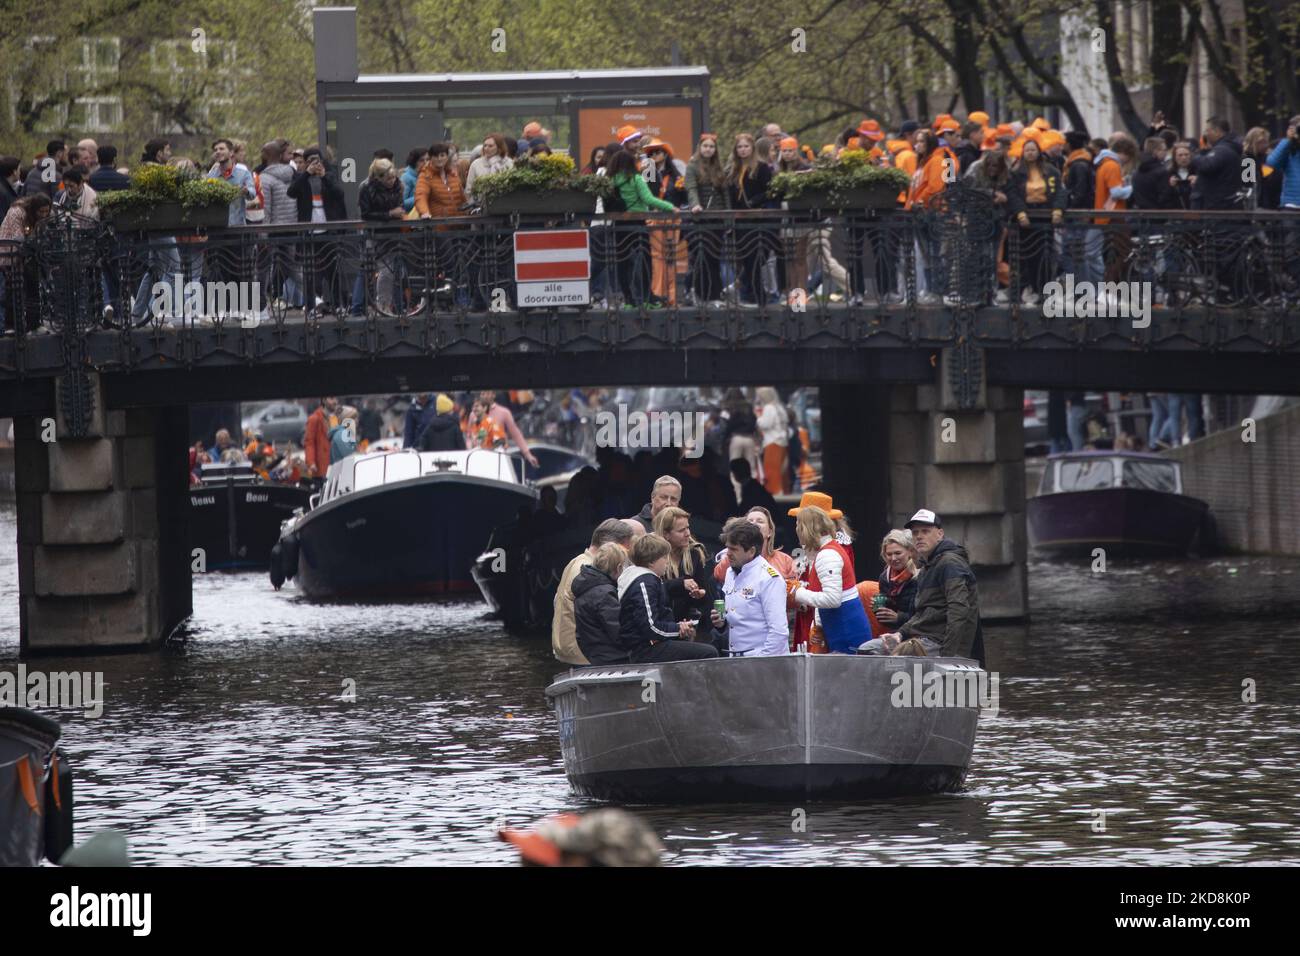 The Netherlands celebrates King's Day after two years of cancellation due to the COVID-19 Coronavirus pandemic and the lockdown restrictions and measures. Thousands of locals and visitors visited the canals of Amsterdam to celebrate with various festivities the birthday of King Willem-Alexander known as Koningsdag, a Dutch national holiday. All kind of boats and vessels are seen in the canals passing under the famous bridges and near the narrow houses of Amsterdam with people on the dancing and having fun. The boats parade down in the inner city canals while travelers gather on the streets. Du Stock Photo